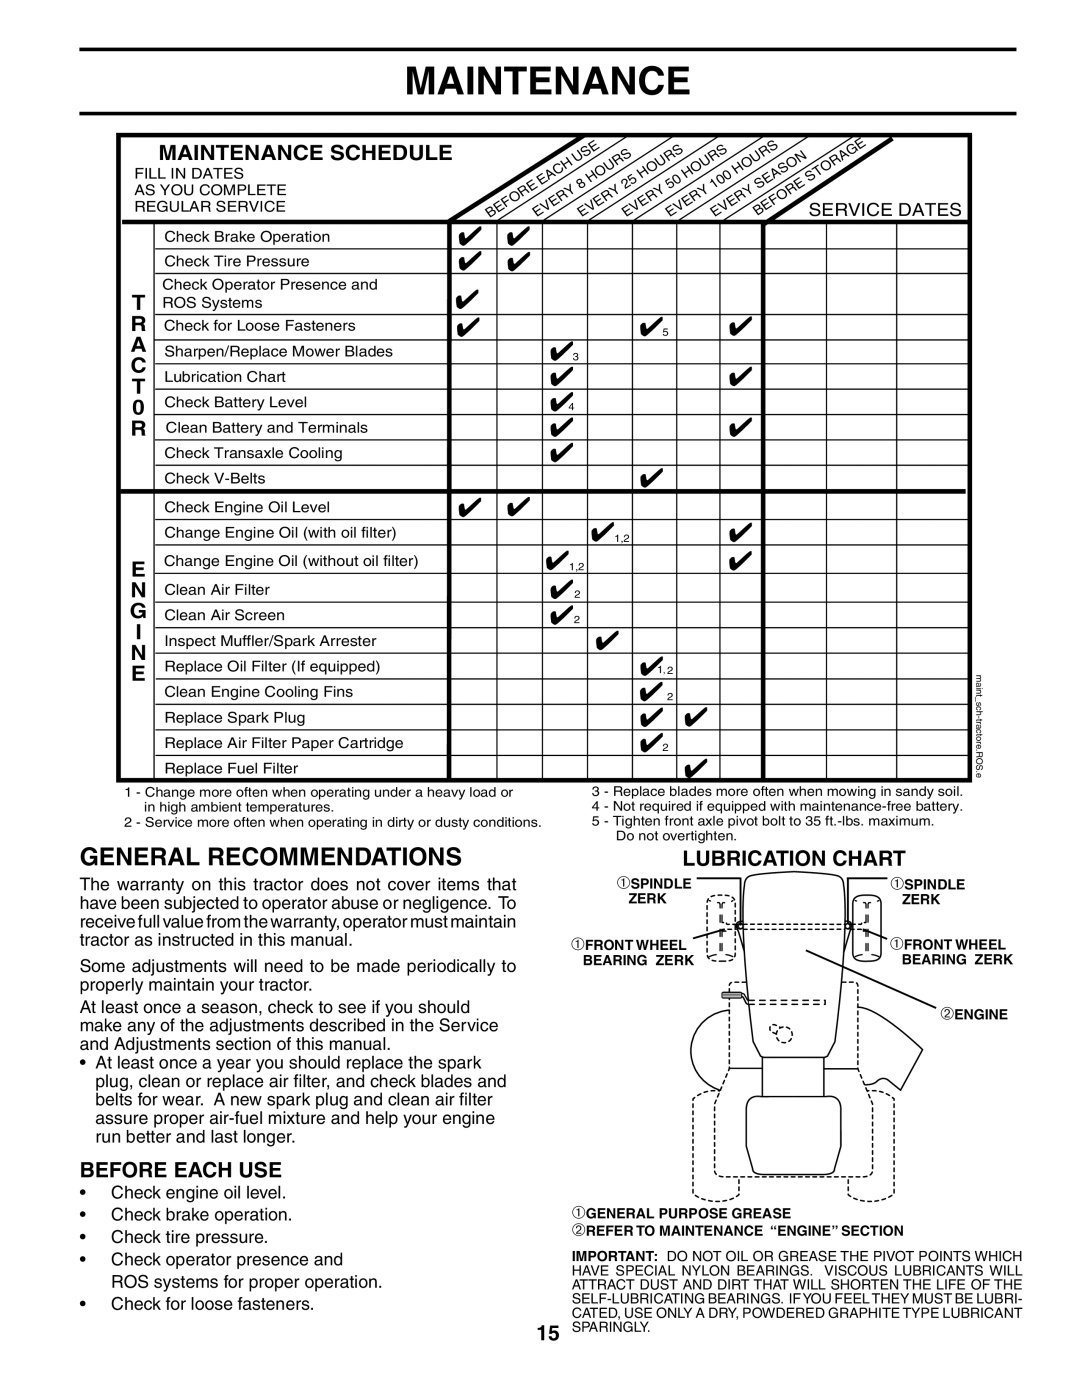 Husqvarna YTH18542 owner manual General Recommendations, Lubrication Chart, Before Each Use, Maintenance Schedule 